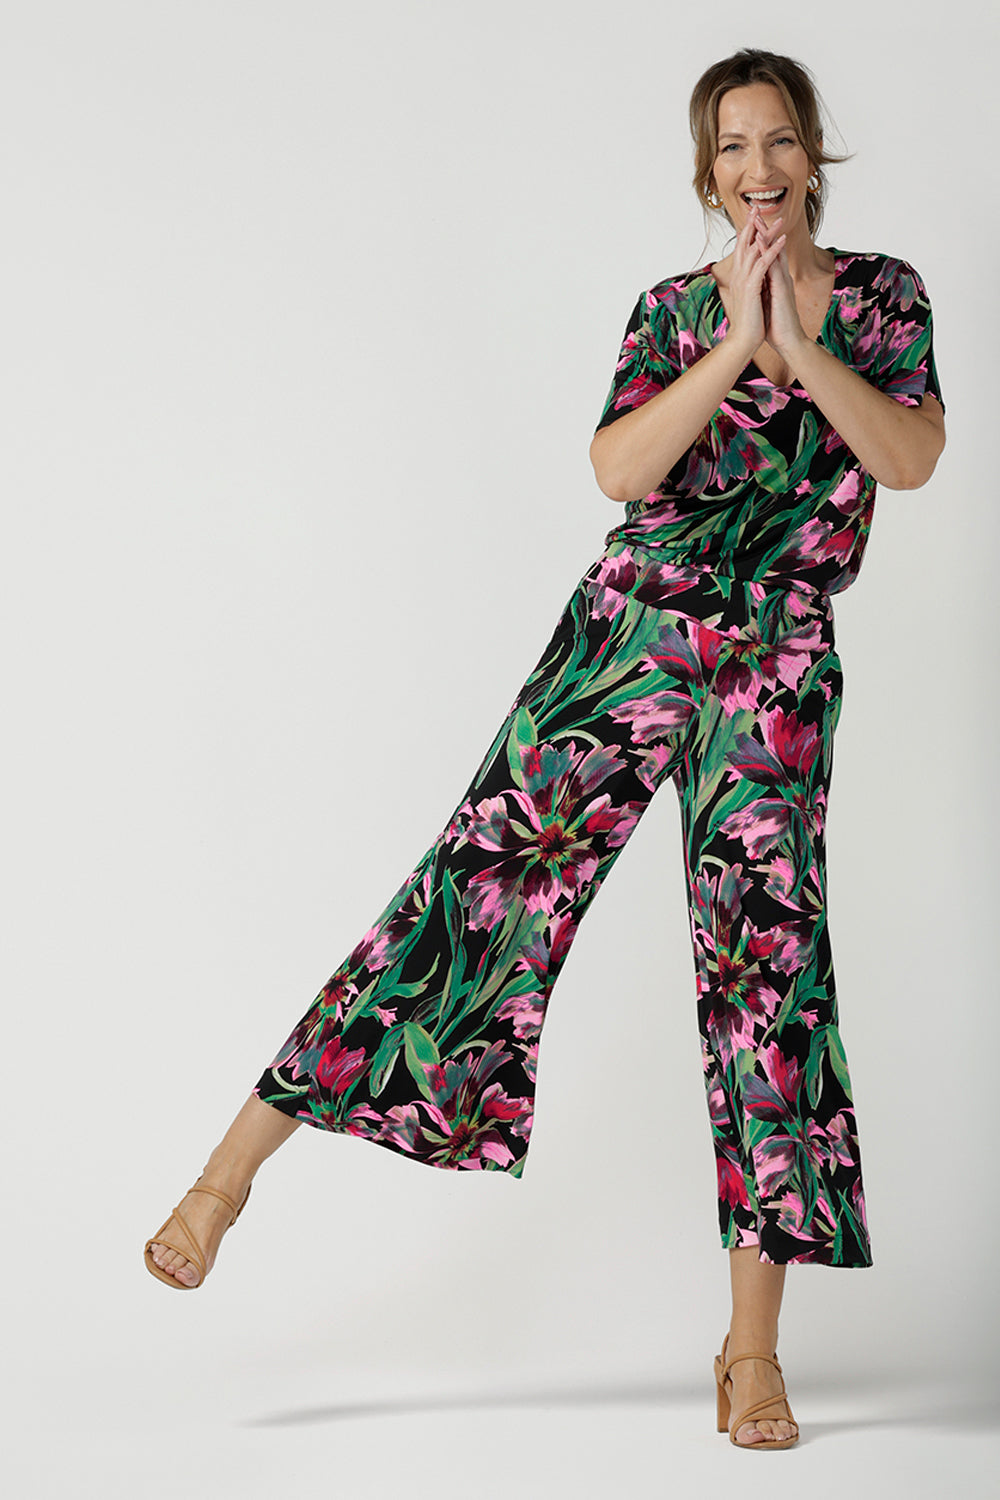 A size 10, 40 plus woman wears printed jersey, wide leg pants as a jumpsuit look wth floral print, flutter sleeve jersey top. Pull-on pants with a deep waistband, the cropped, culotte legs make great summer pants that work for petite heights as well as taller women. Shop pants online in sizes 8 to 24.